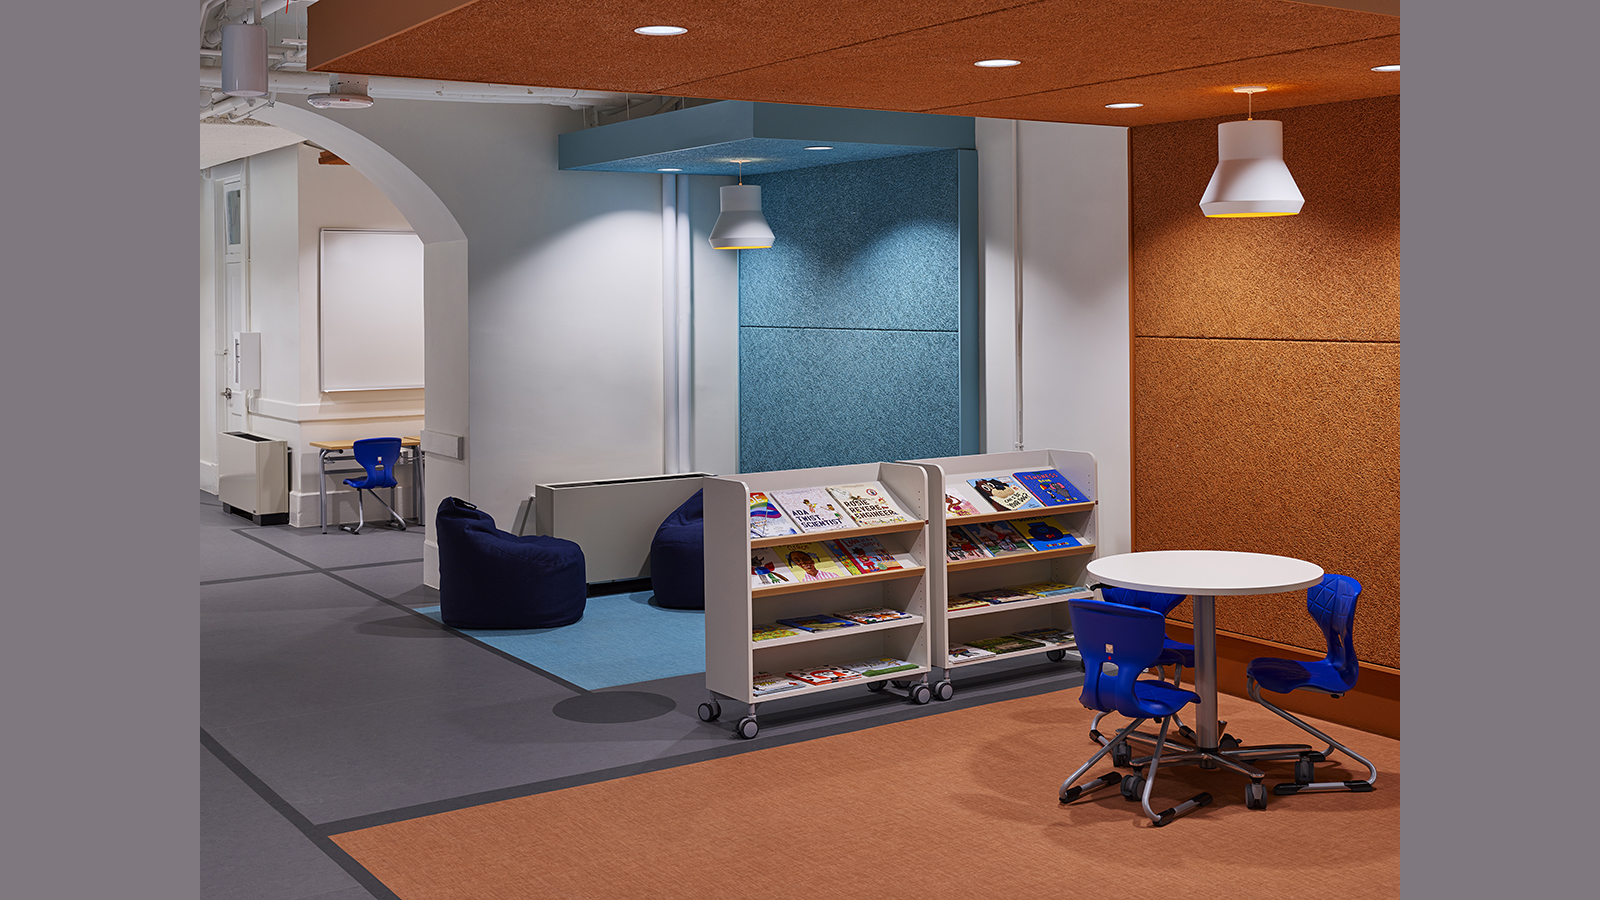 Creative Minds International Interior, two study stations next to rolling bookshelves